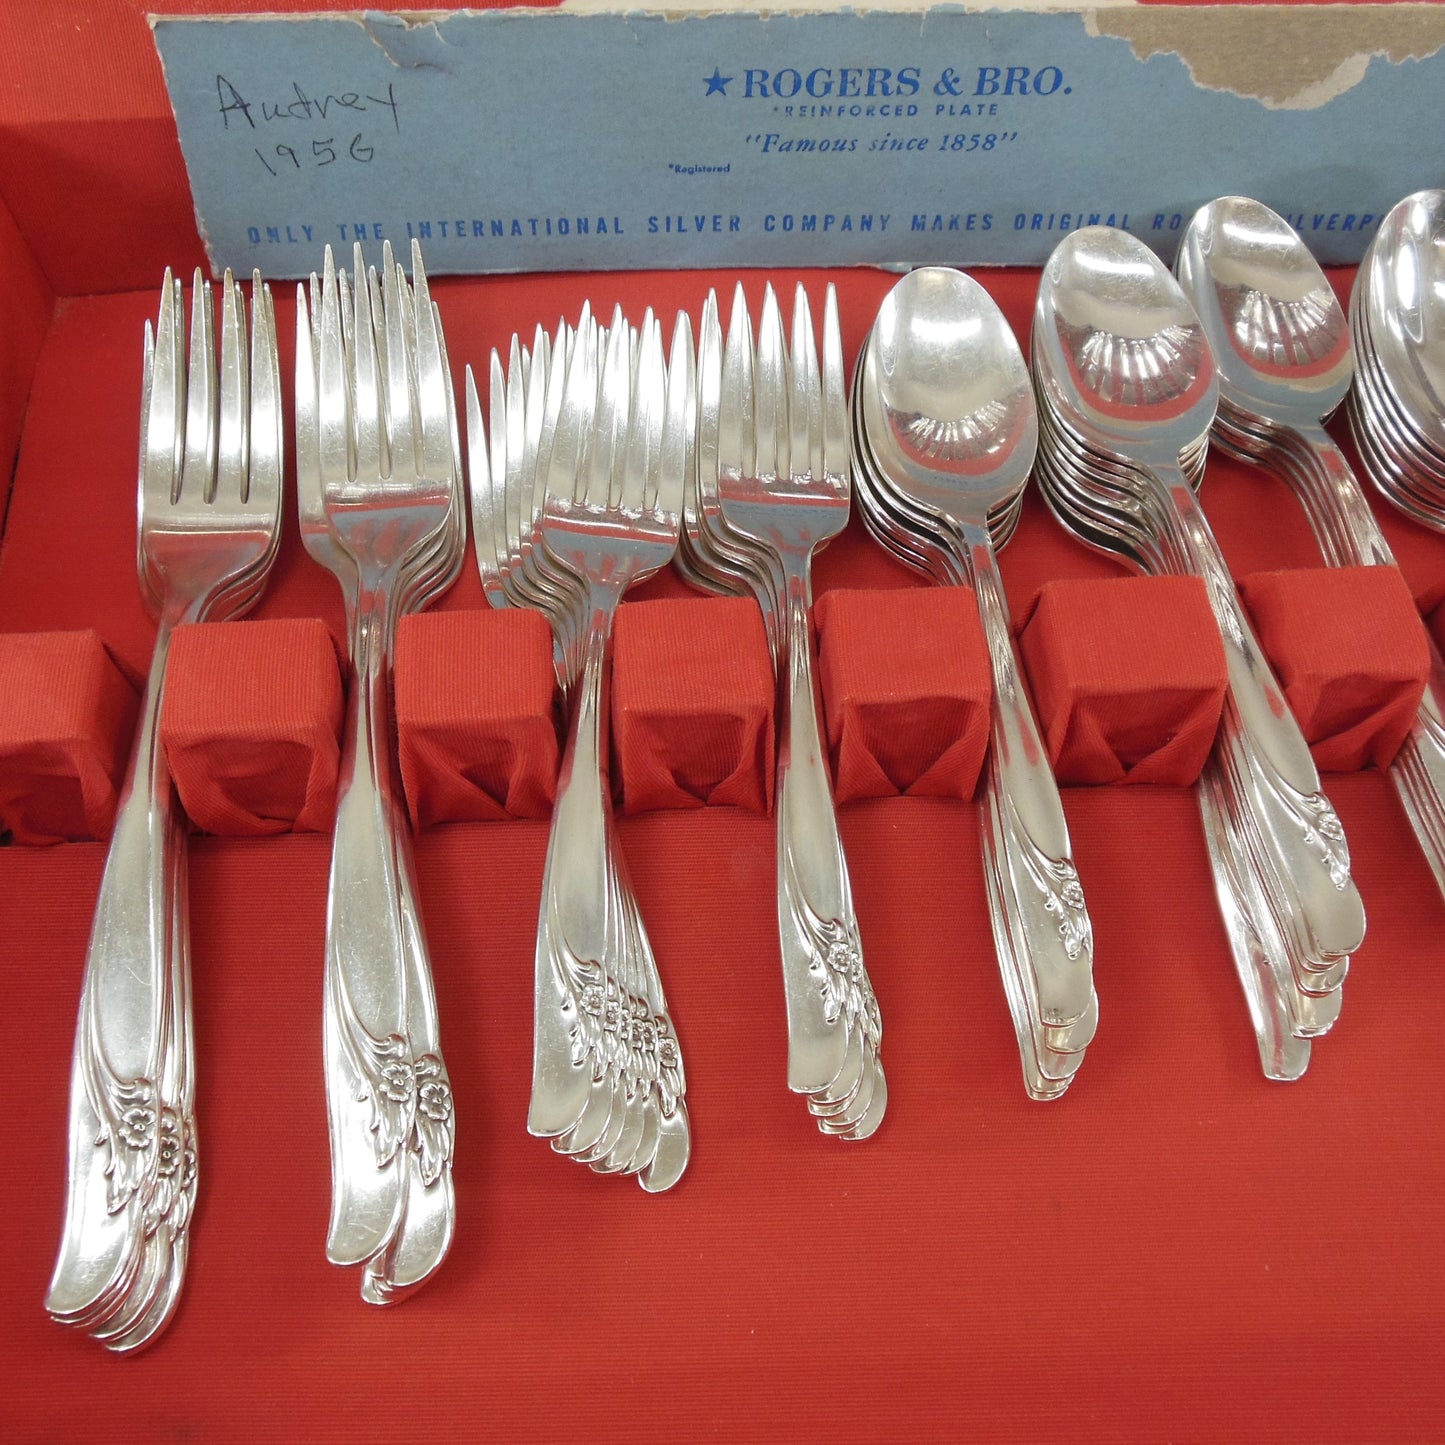 Rogers & Bros. 1957 Exquisite Radiant Lady Silverplate Silverware Set - Service for 12 Vintage